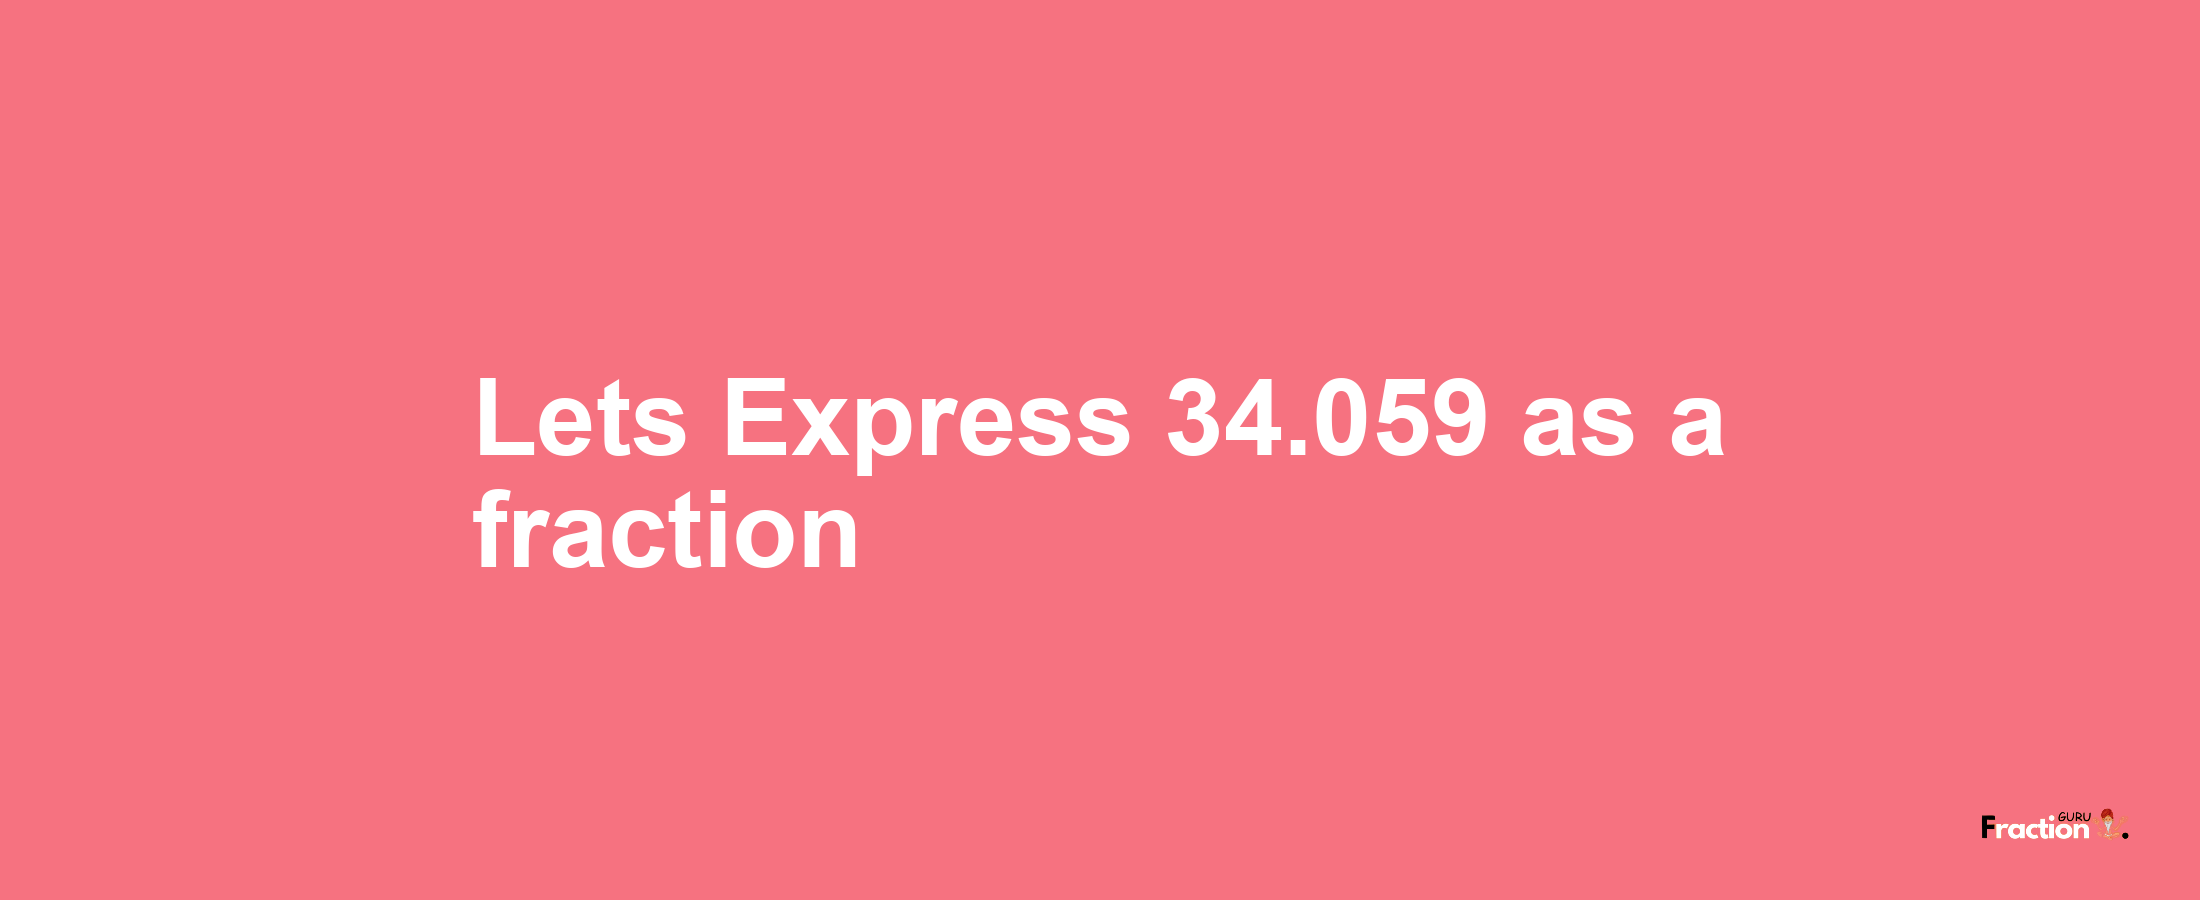 Lets Express 34.059 as afraction